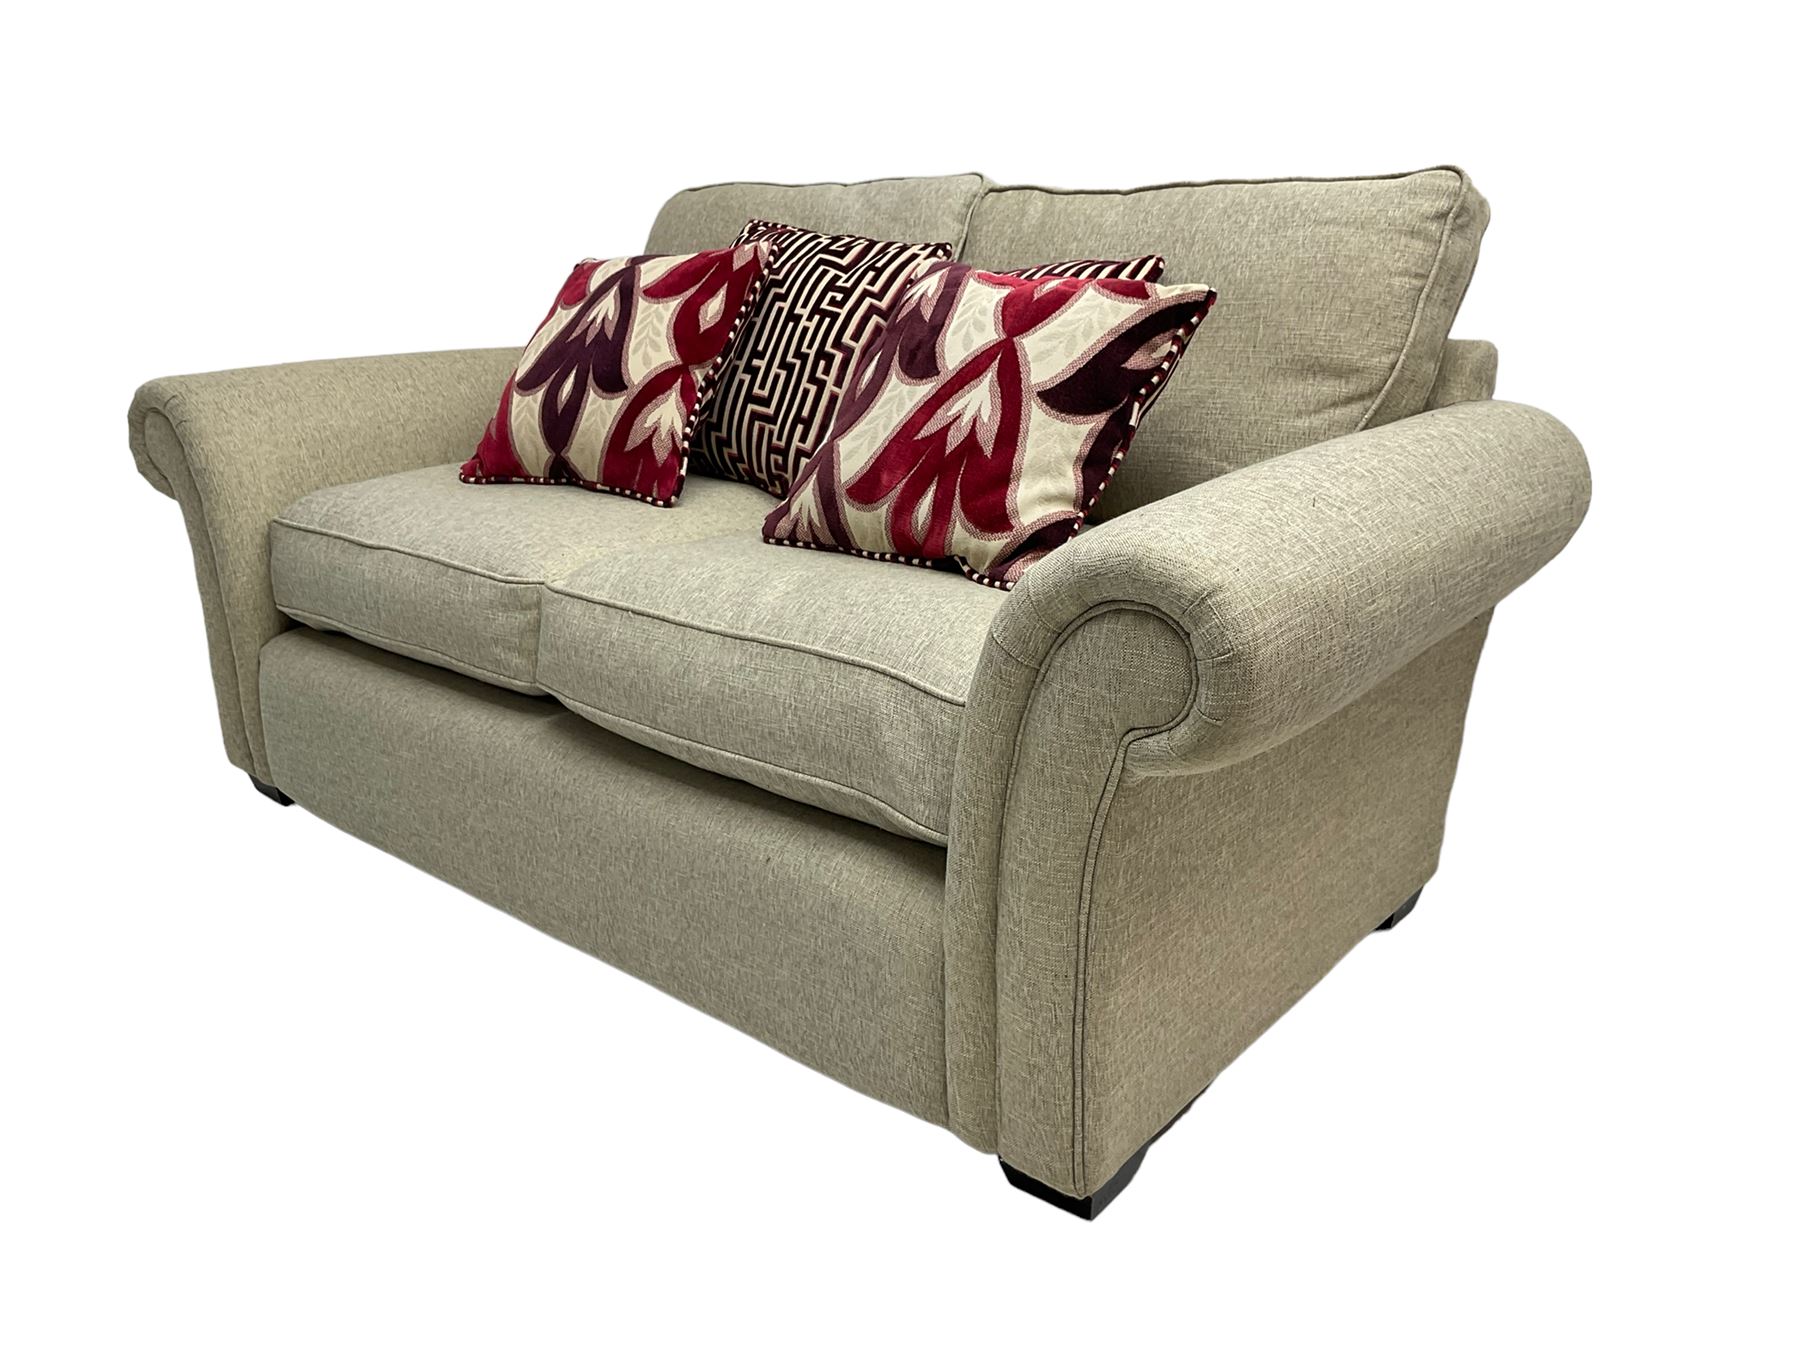 Two seater sofa - Image 2 of 6